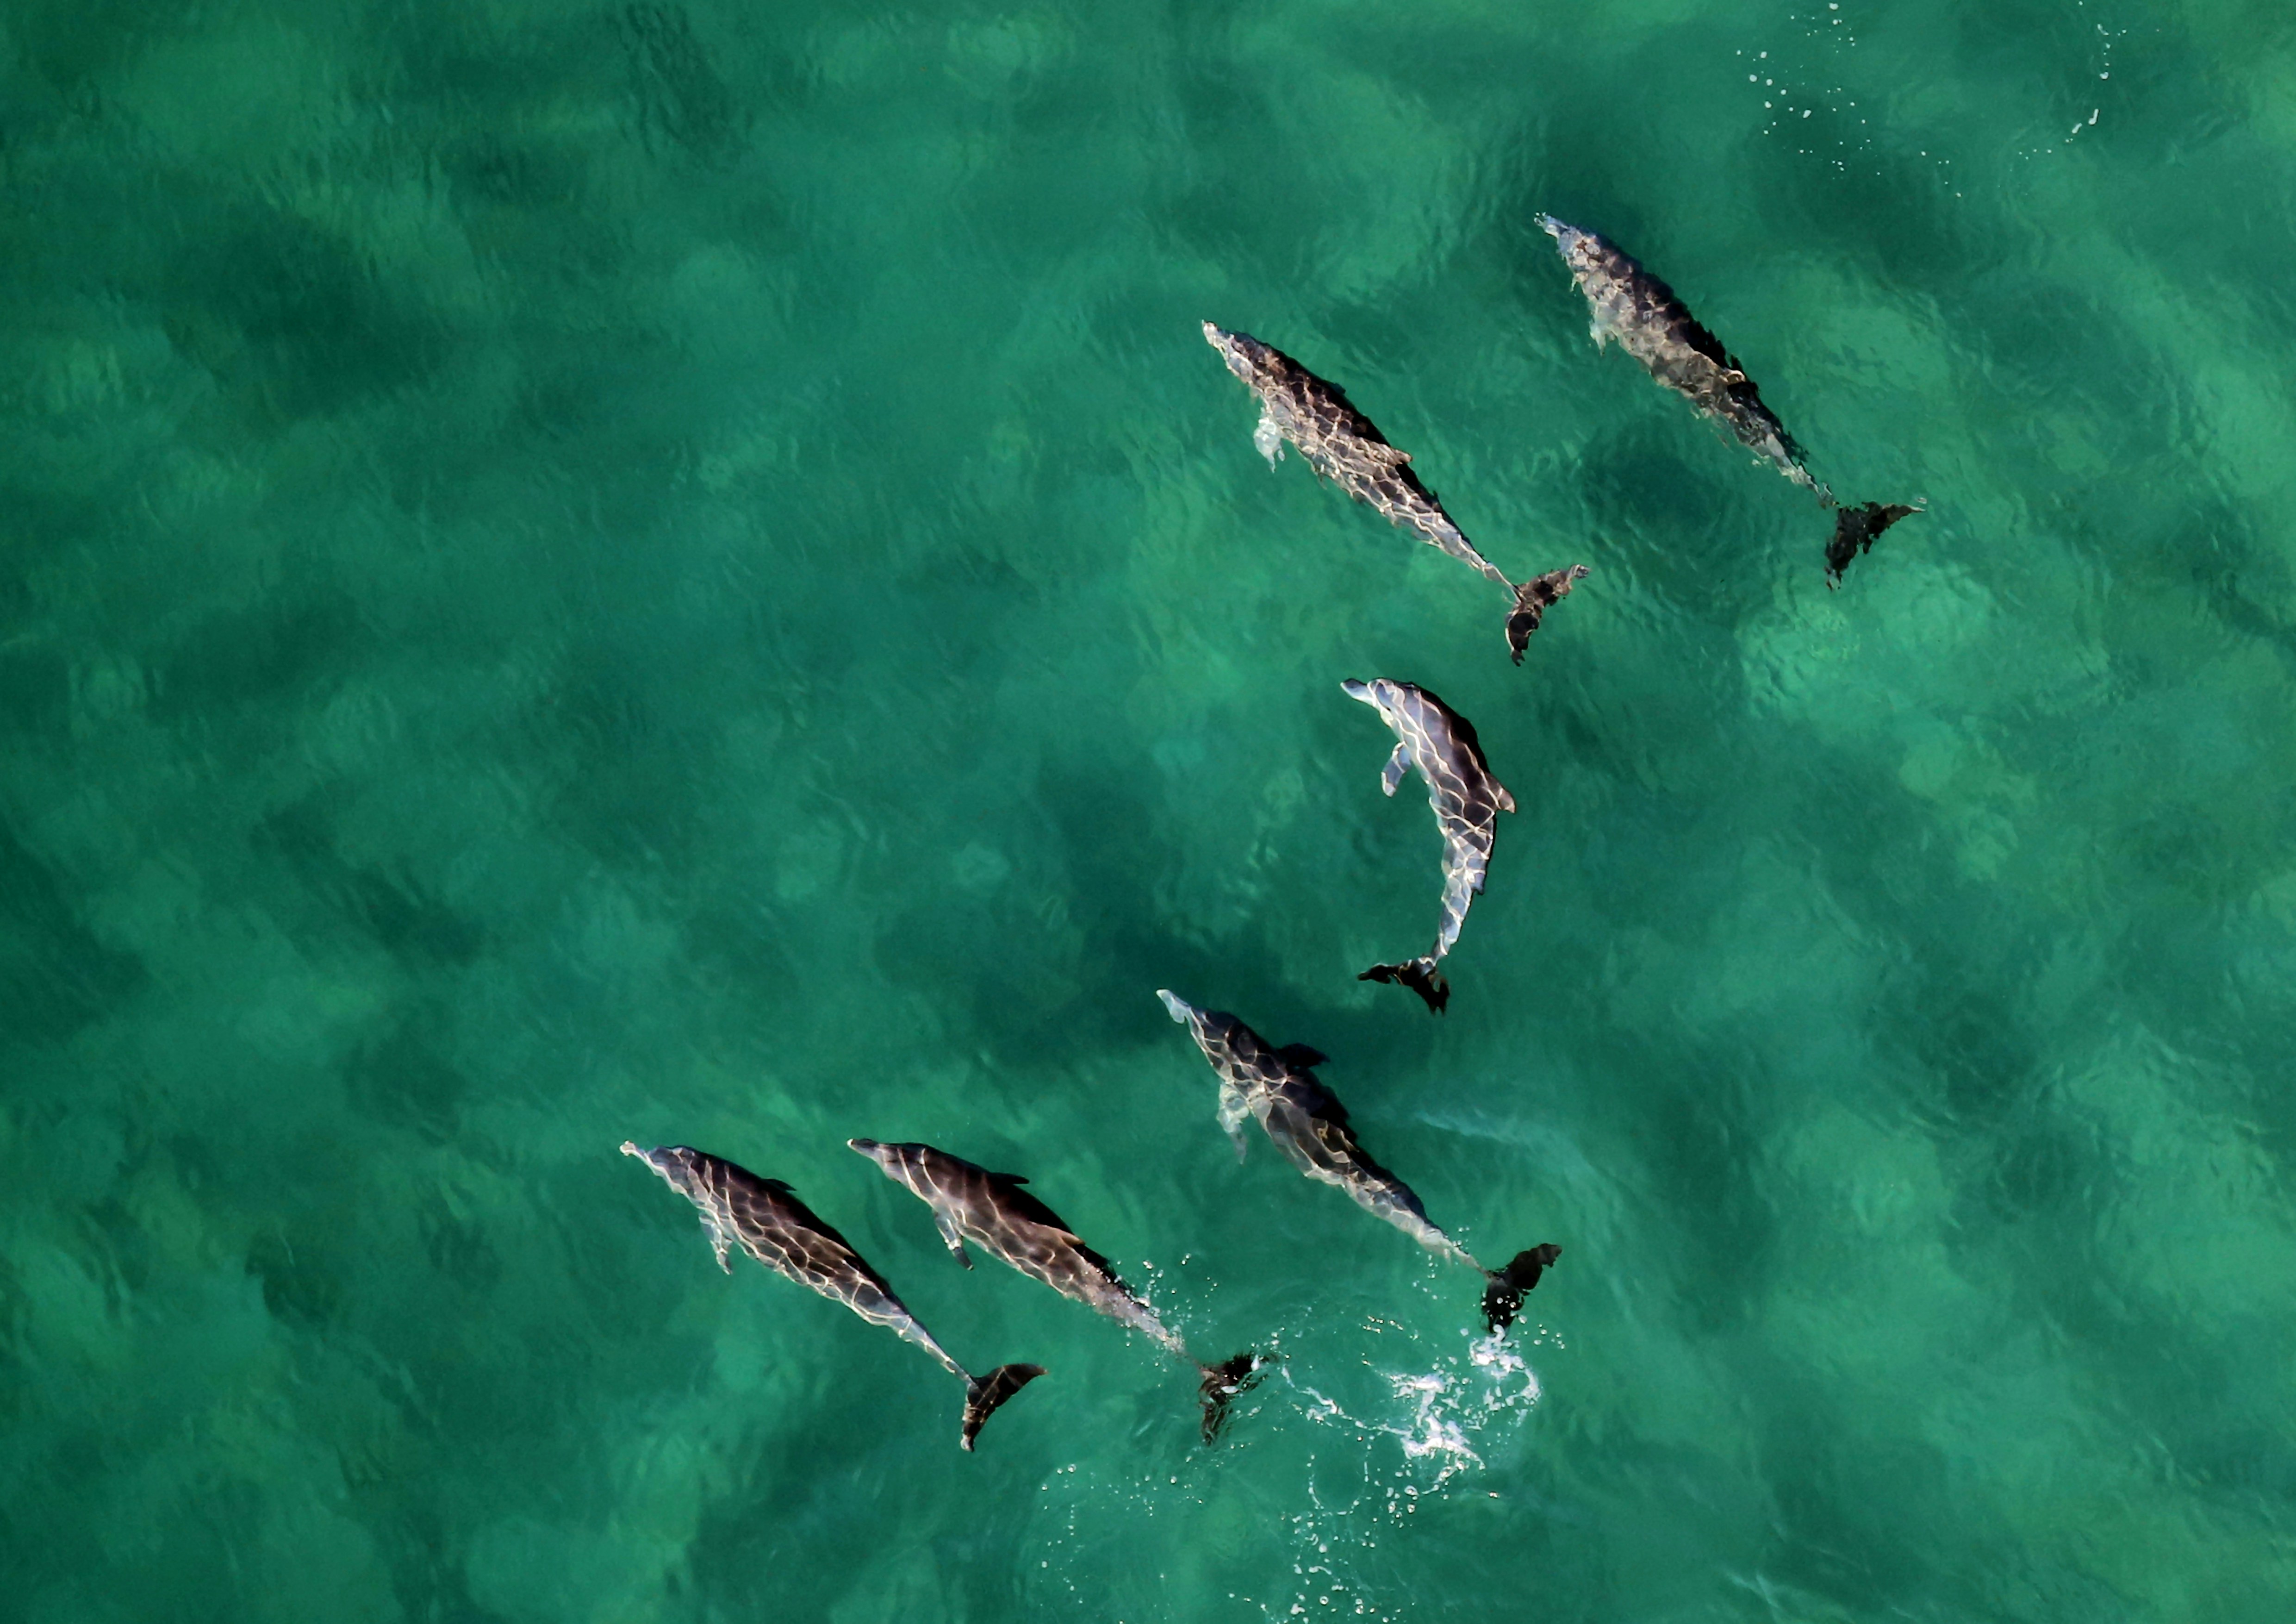 During an aerial survey of marine mammals this small pod kindly posed for the camera.